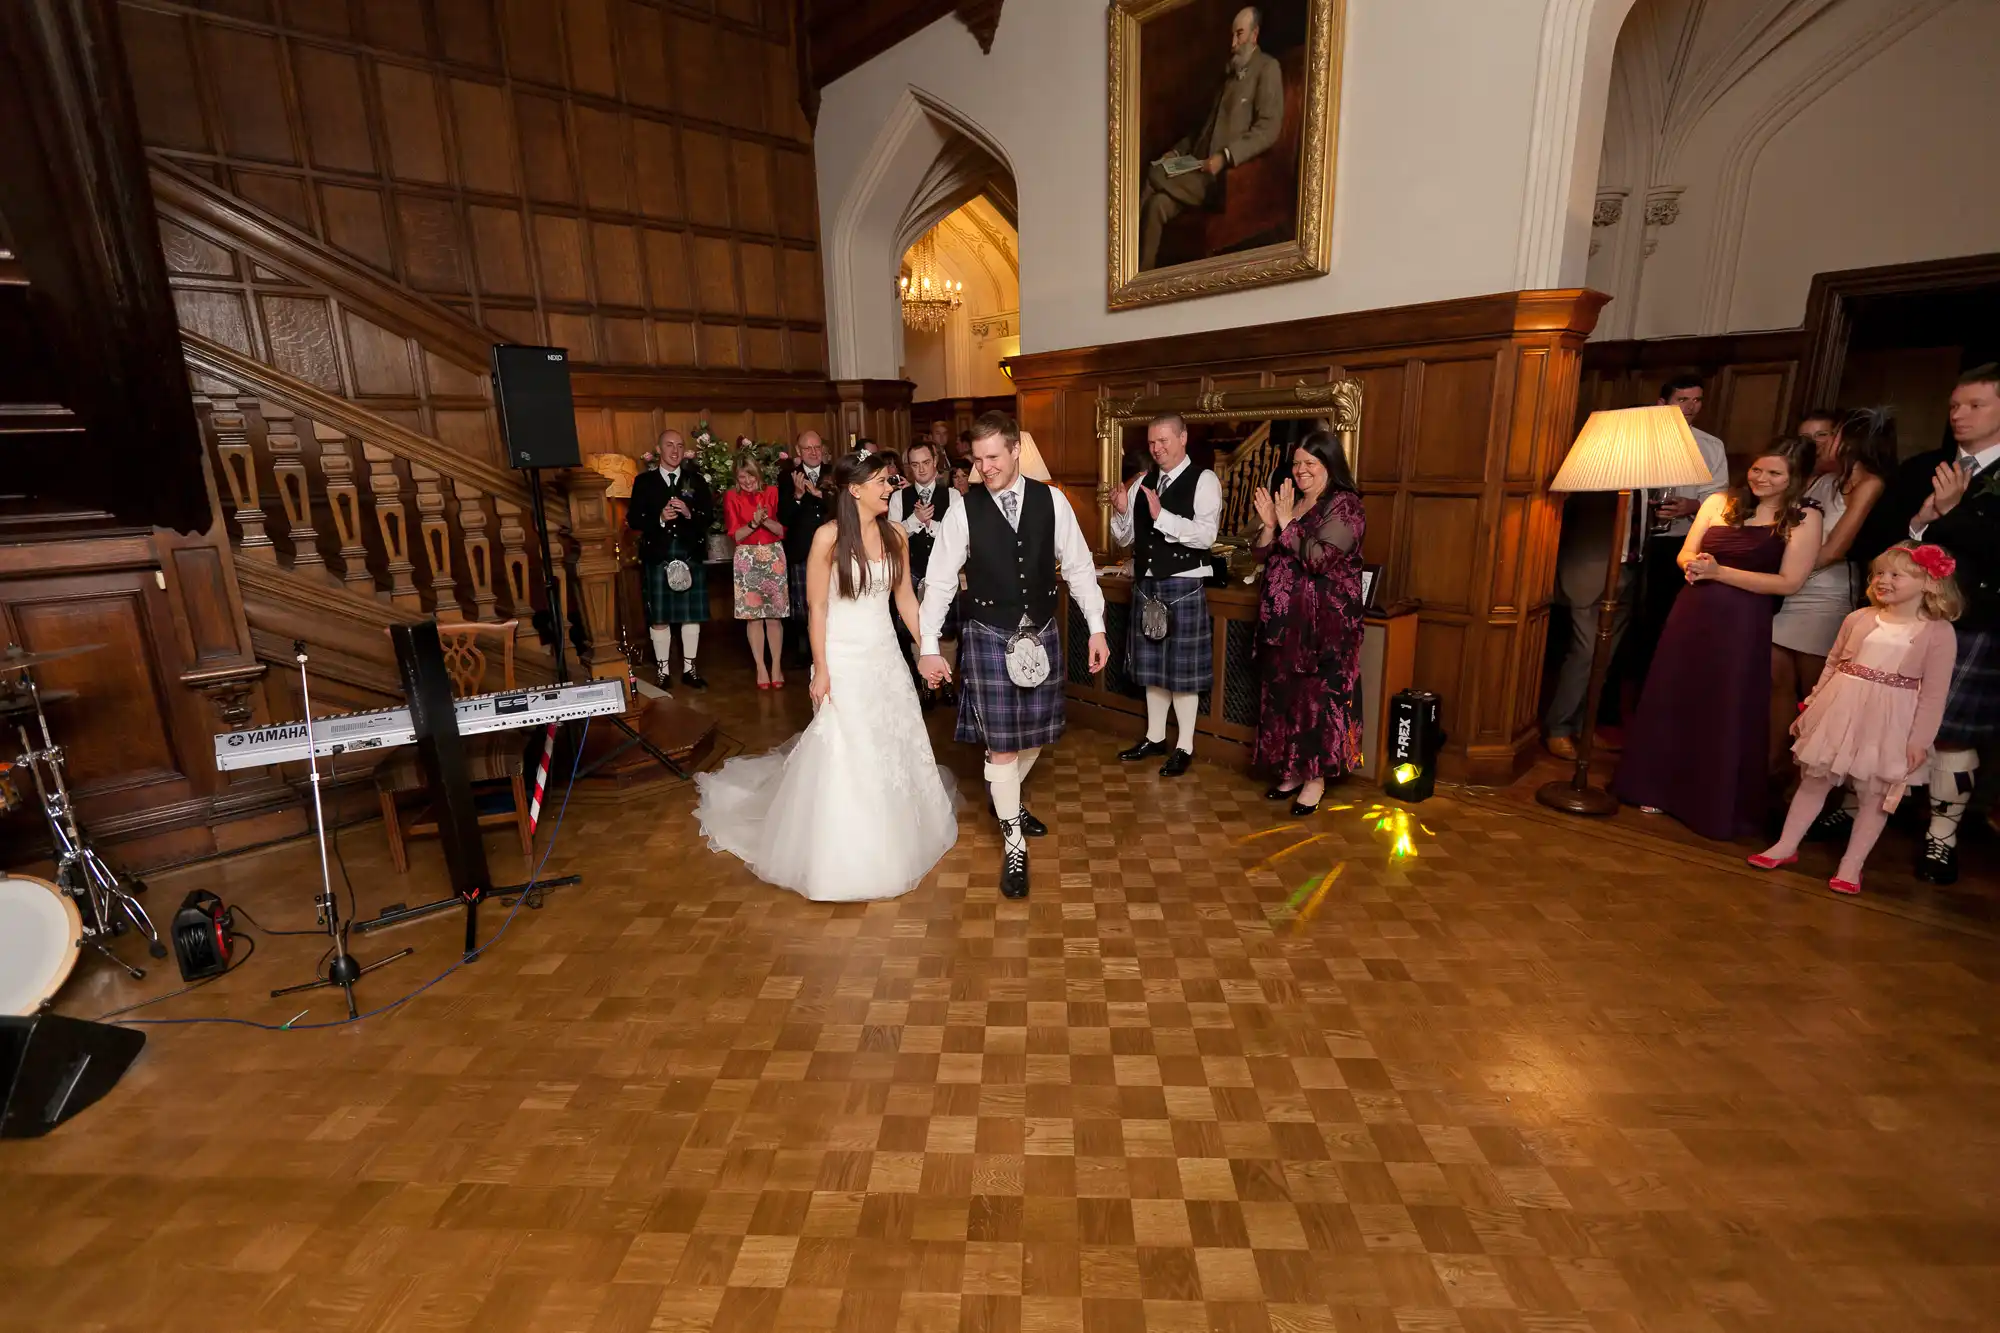 A bride and groom, the latter in a kilt, hold hands and dance in a hall with guests watching and musical instruments nearby.